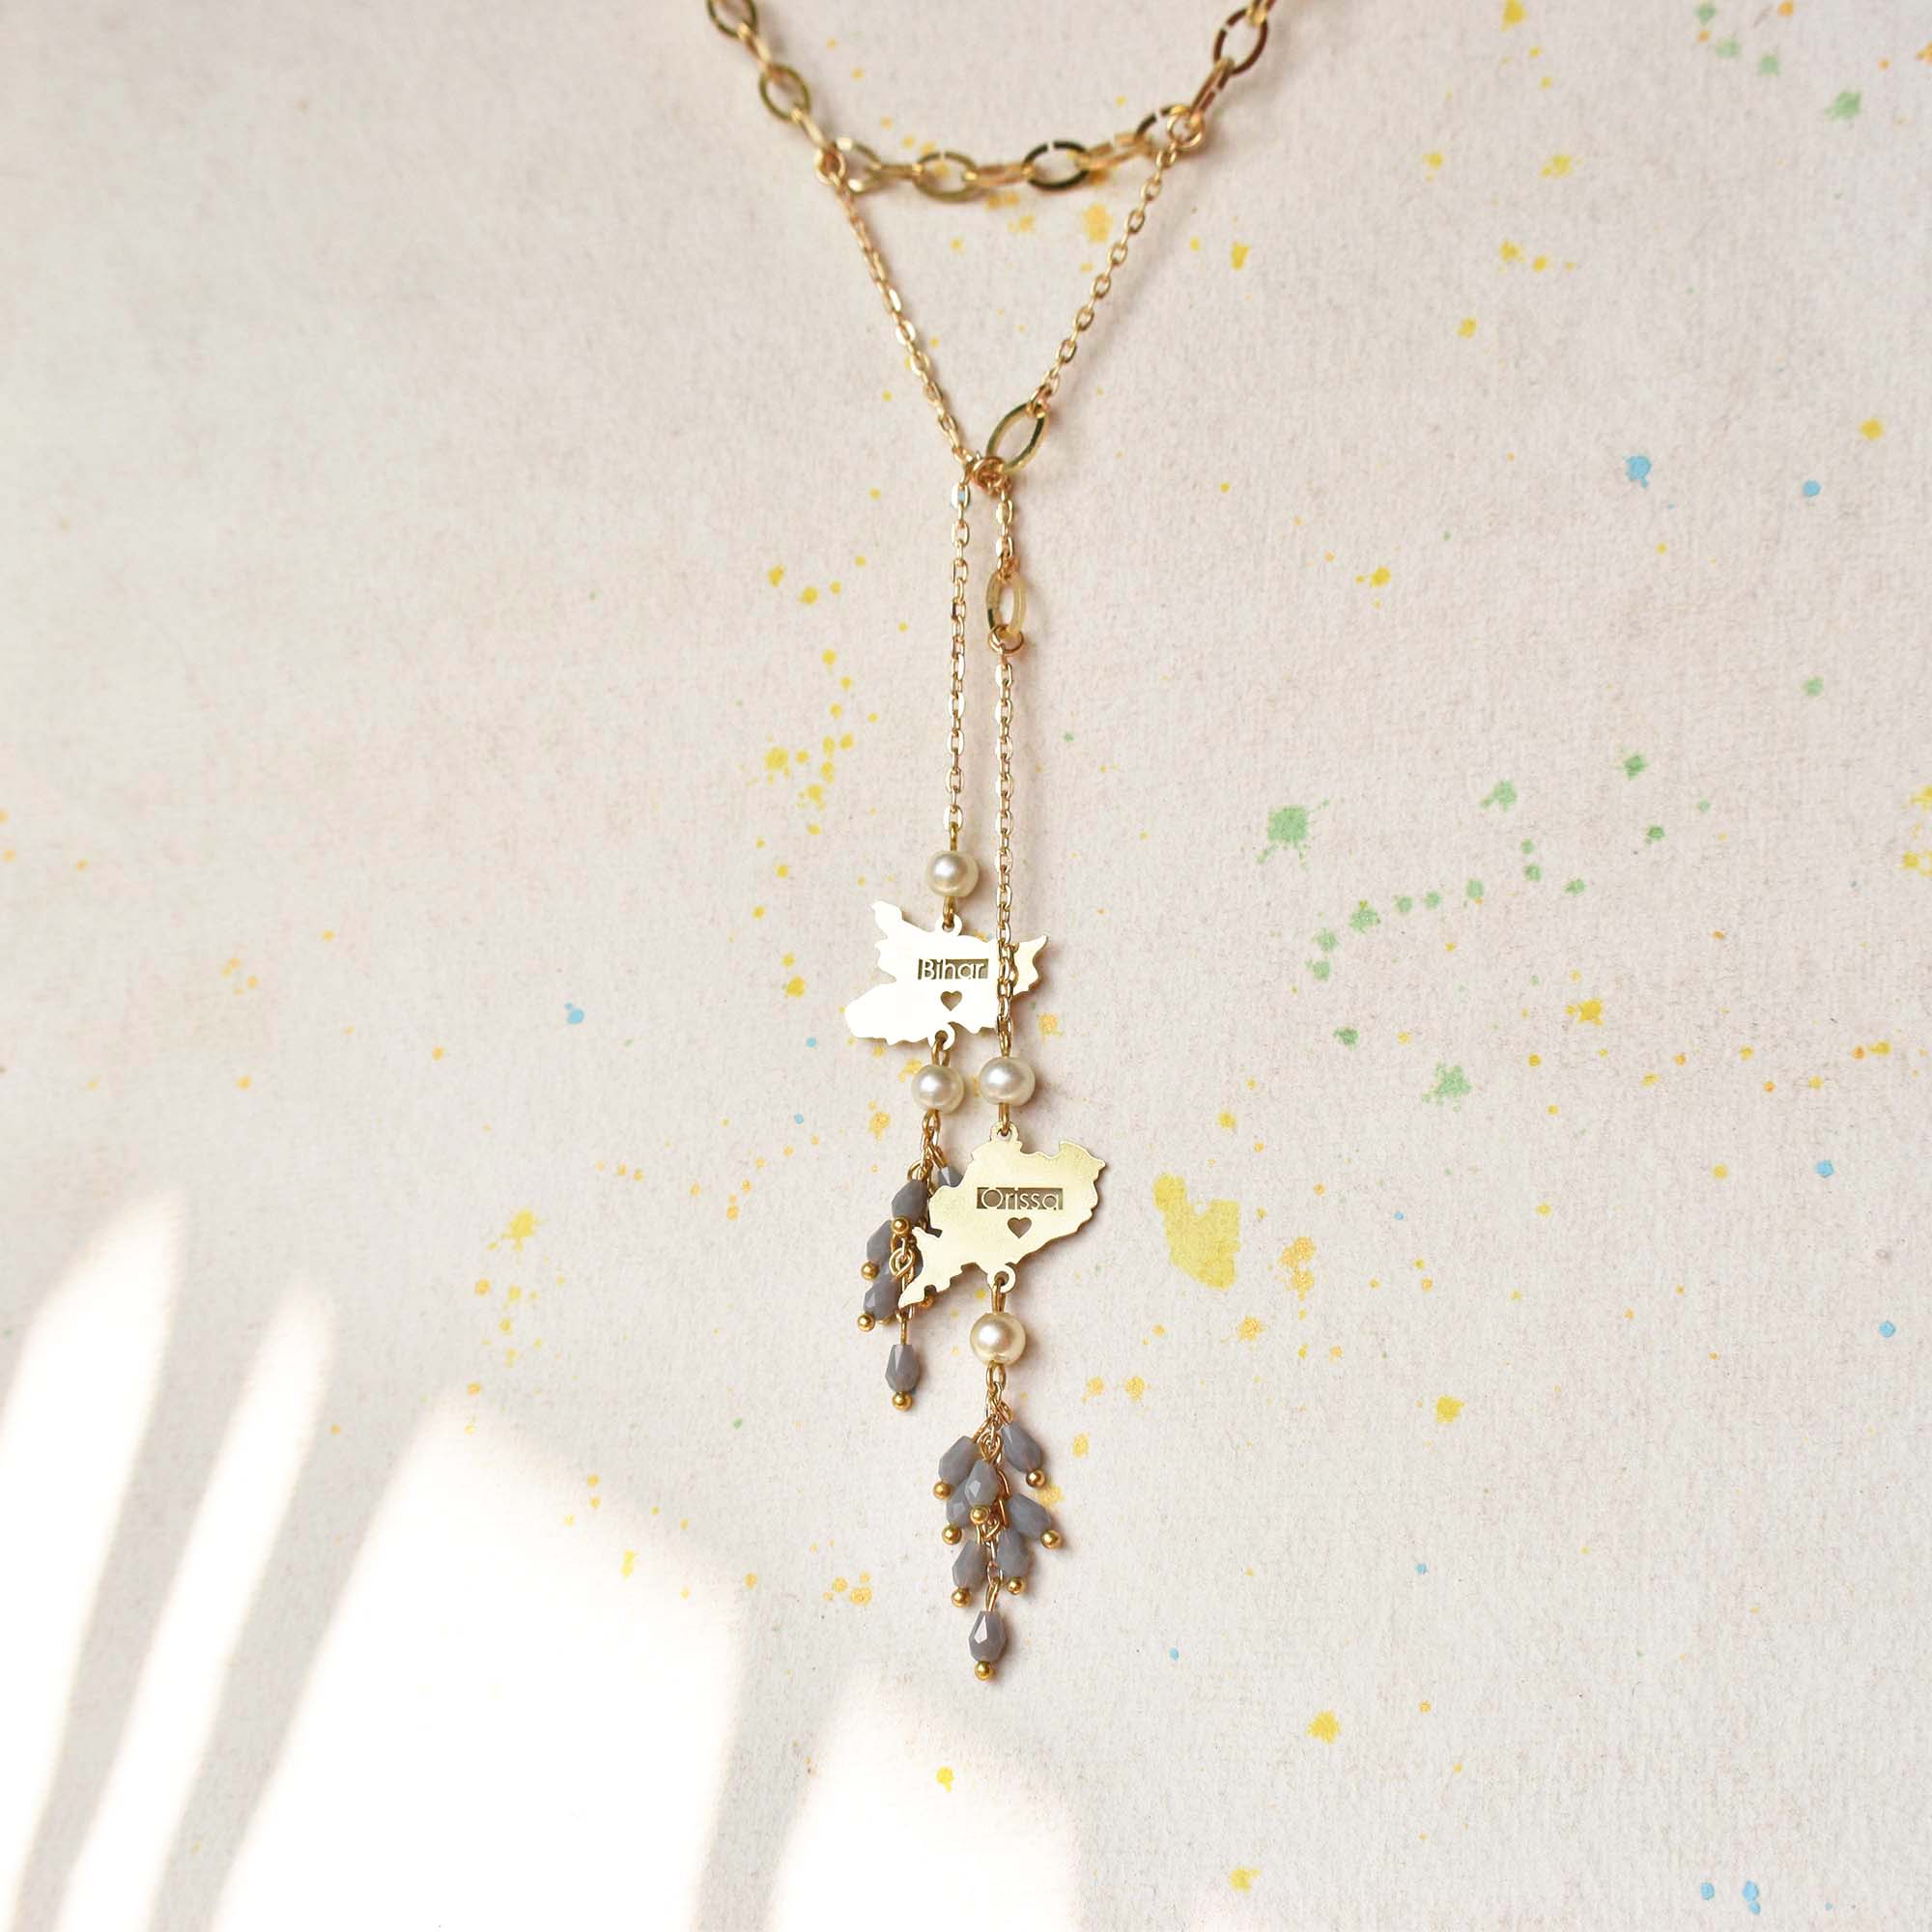 Knot - Me State Charm Necklace